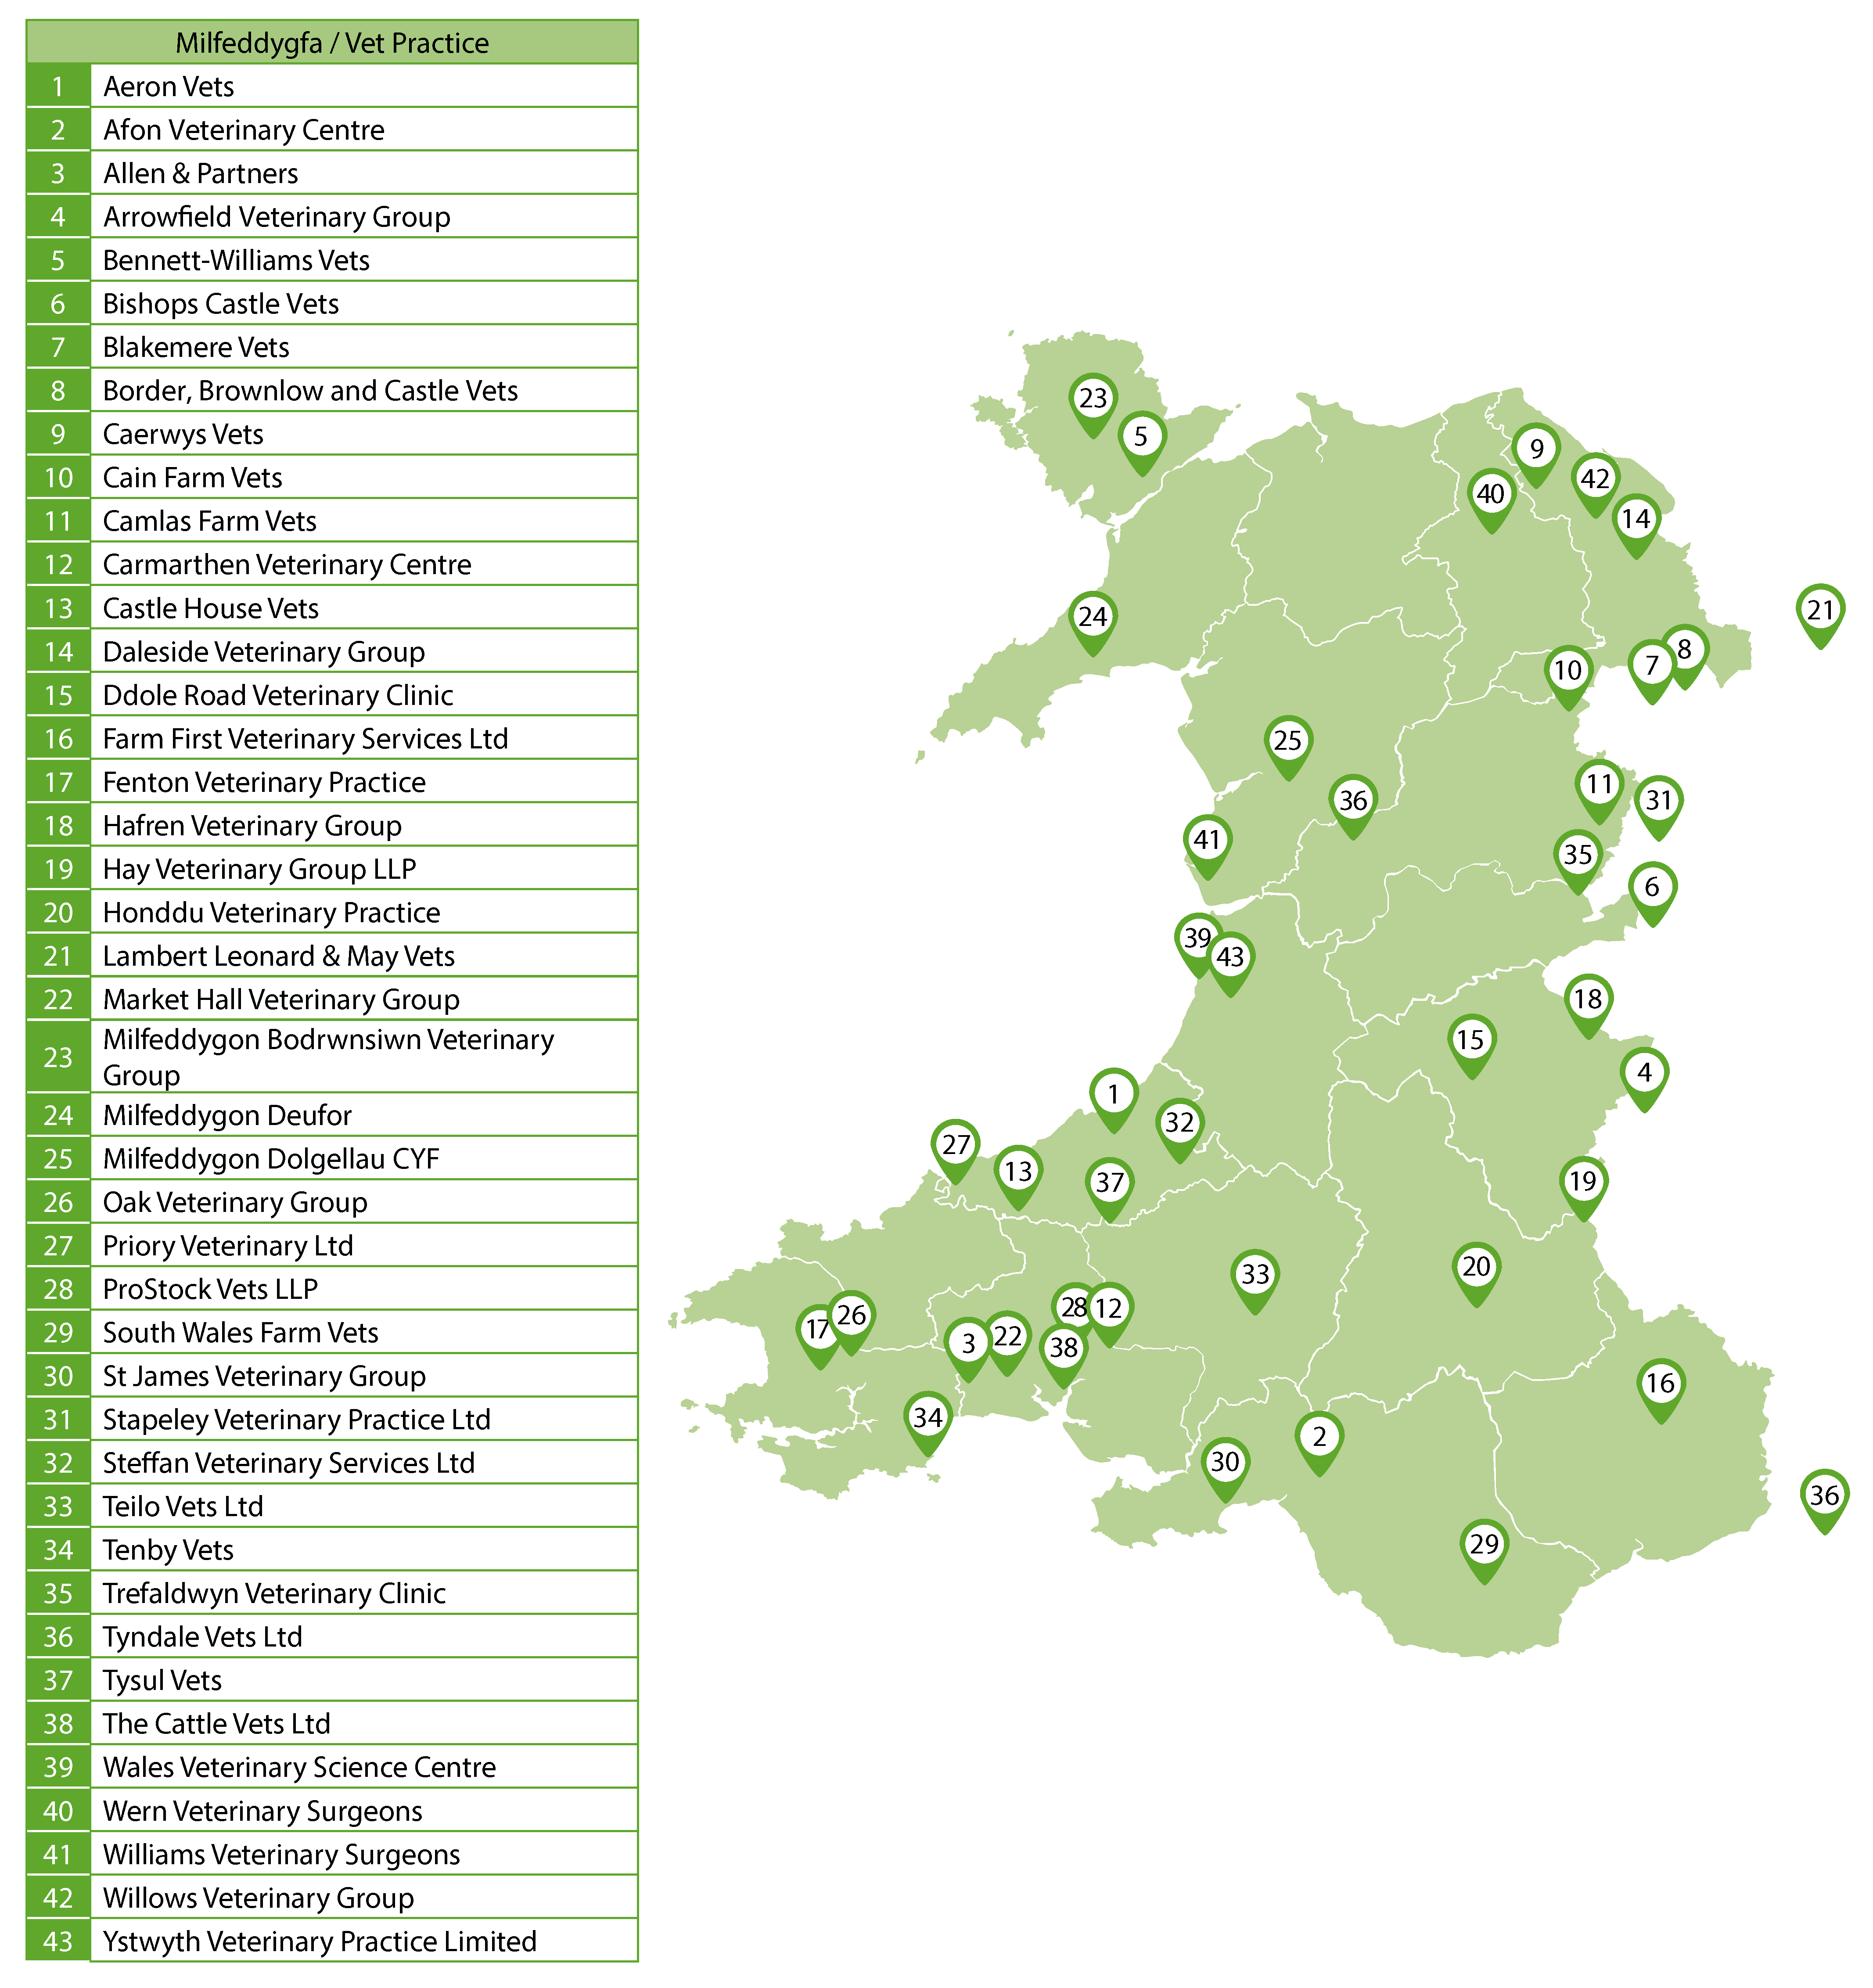 Vet practices throughout Wales: